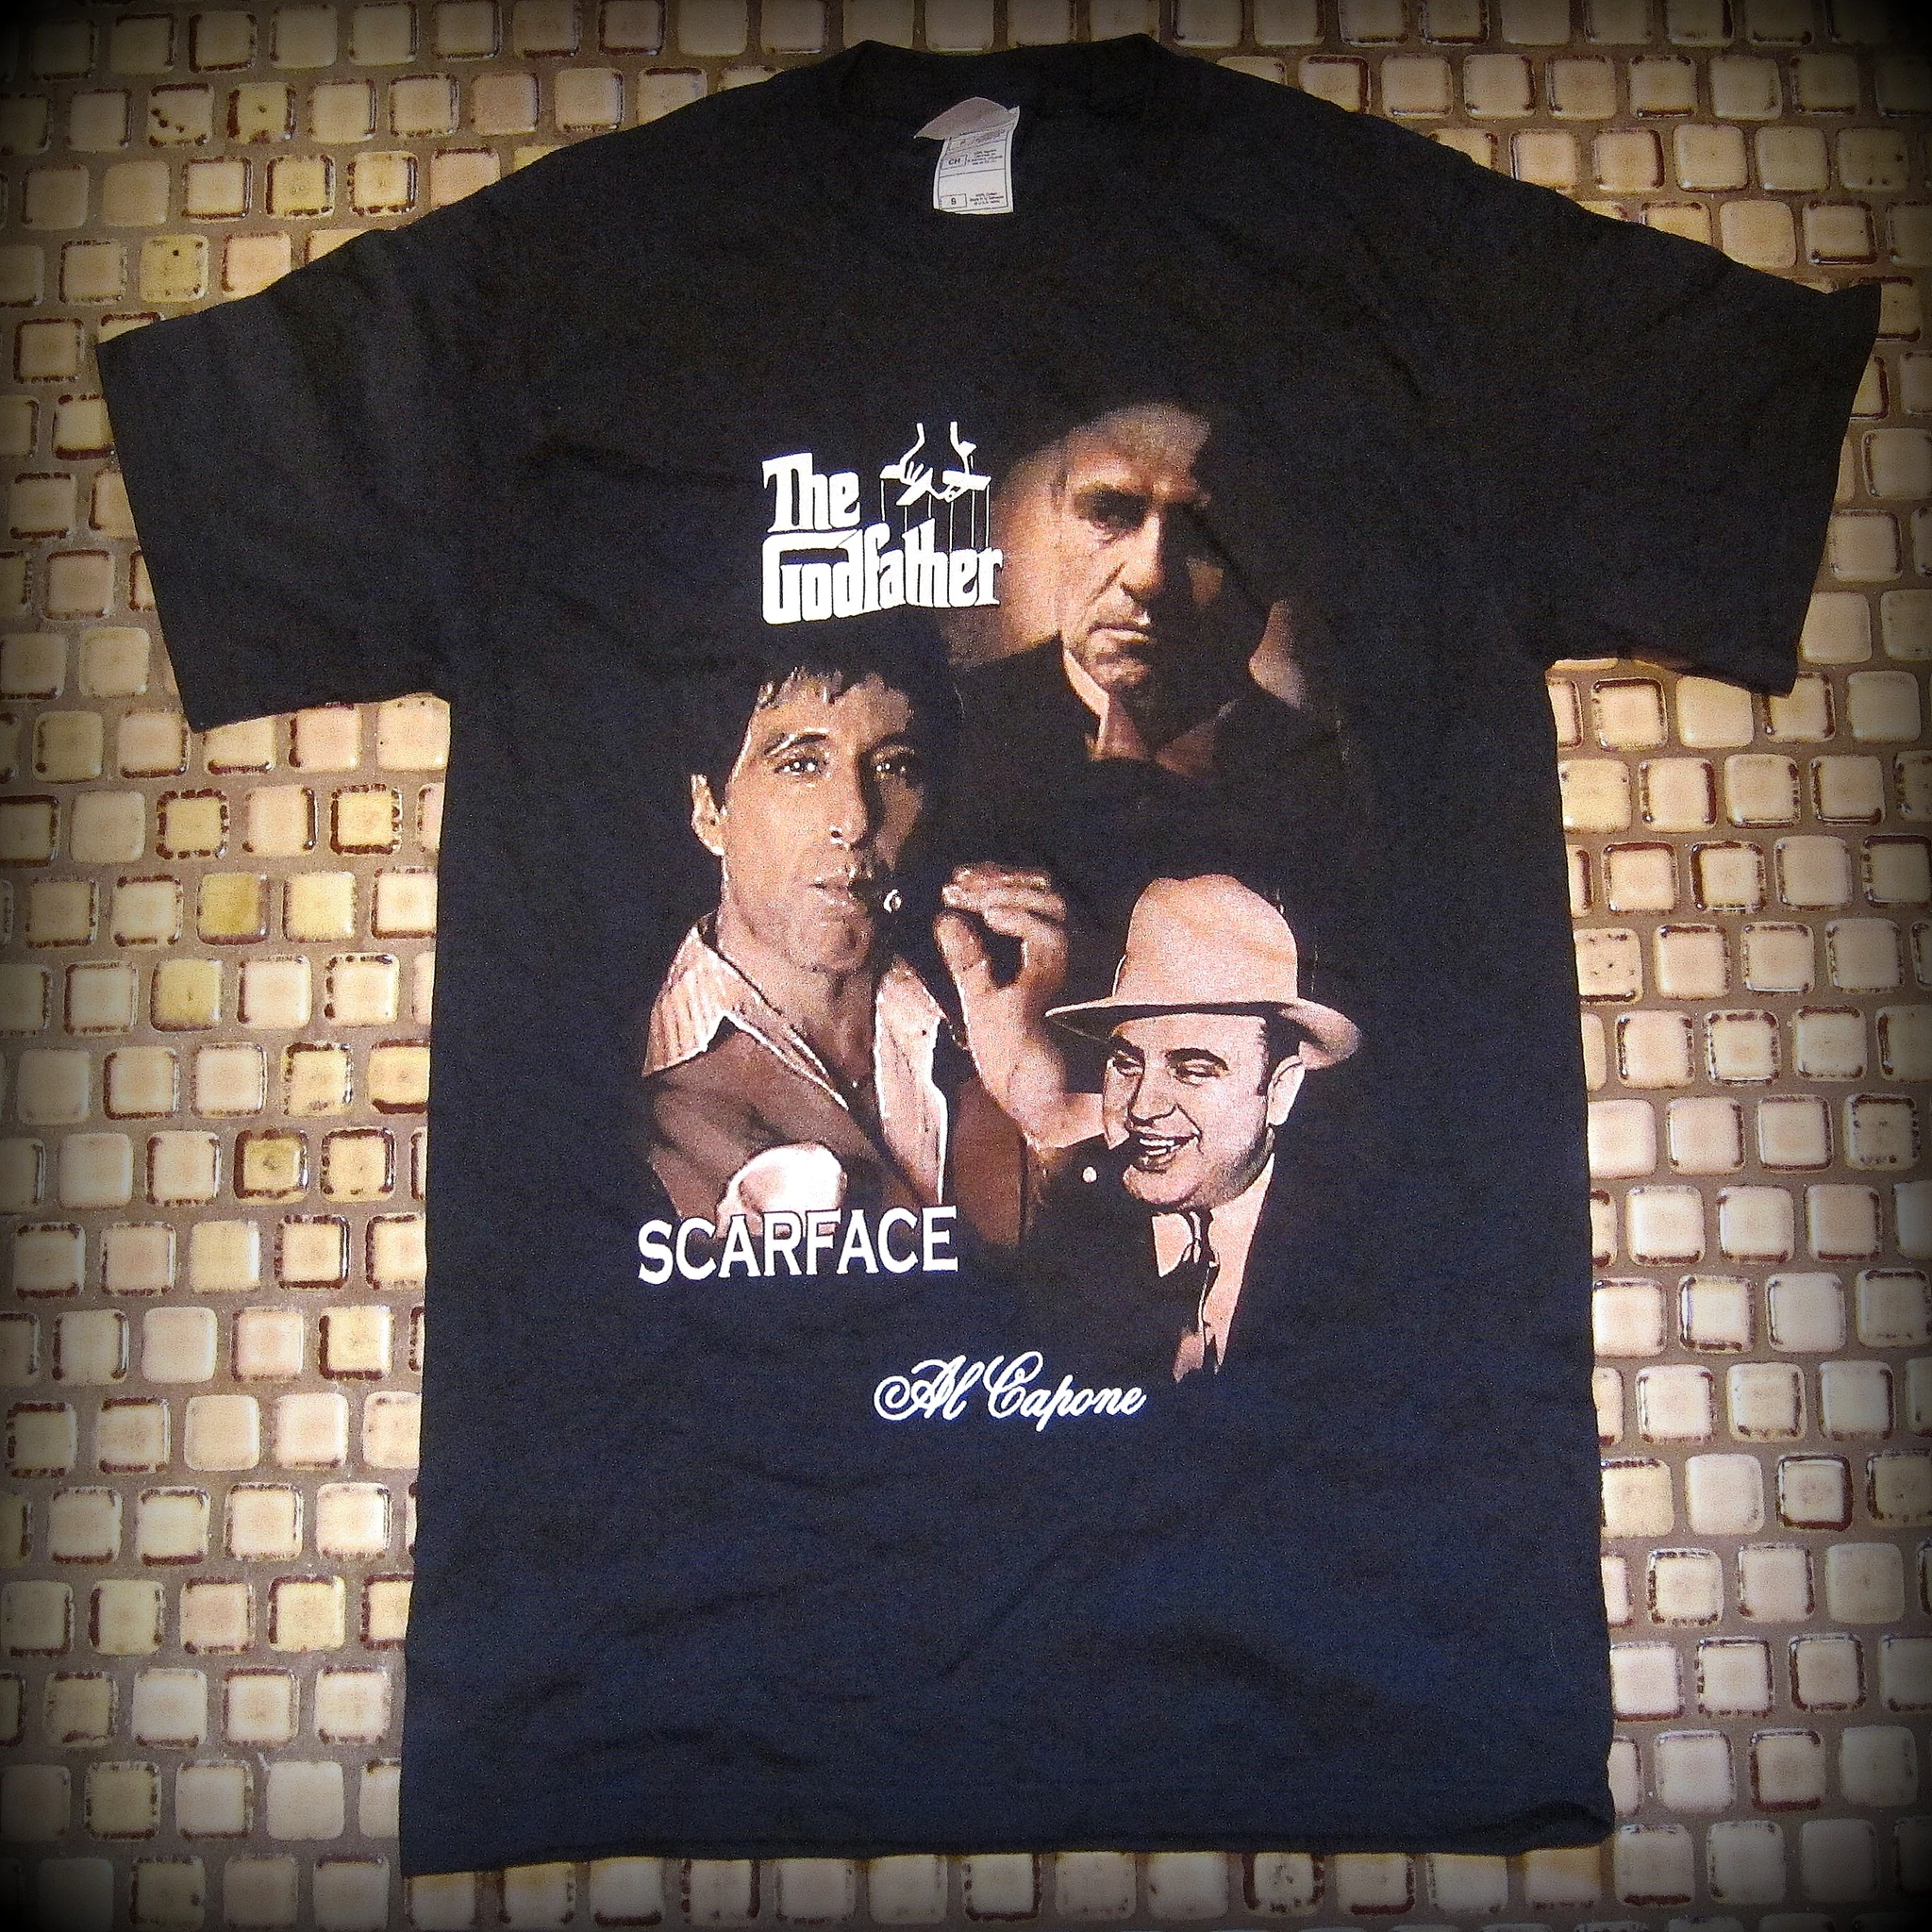 SCARFACE /The Godfather - Original Gangstas - Two Sided Printed -T-Shirt